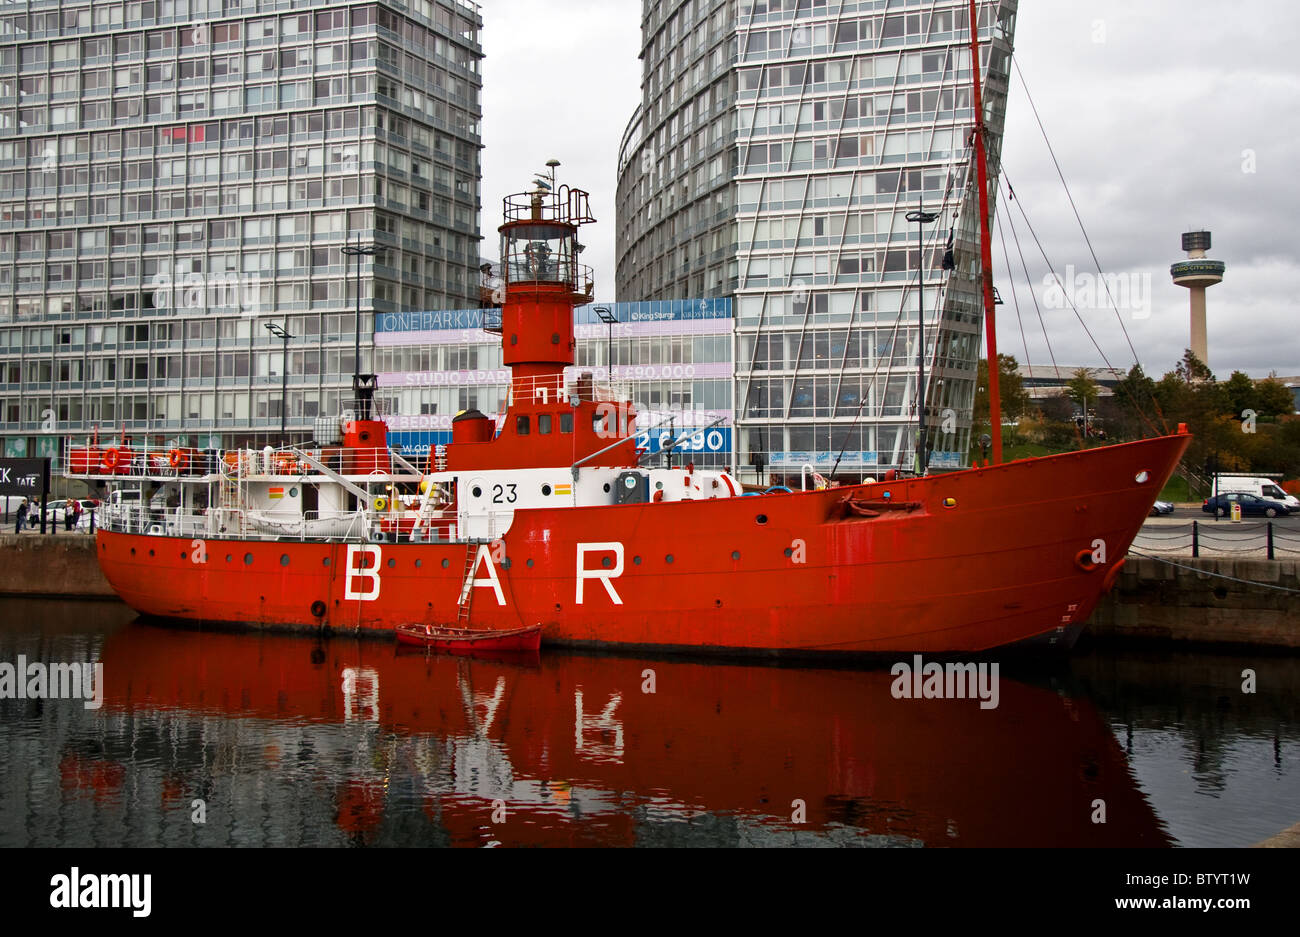 Former Mersey Bar lightship - Planet, overcast day, Canning Dock, Liverpool, UK. (Park West development, Liverpool One beyond.) Stock Photo